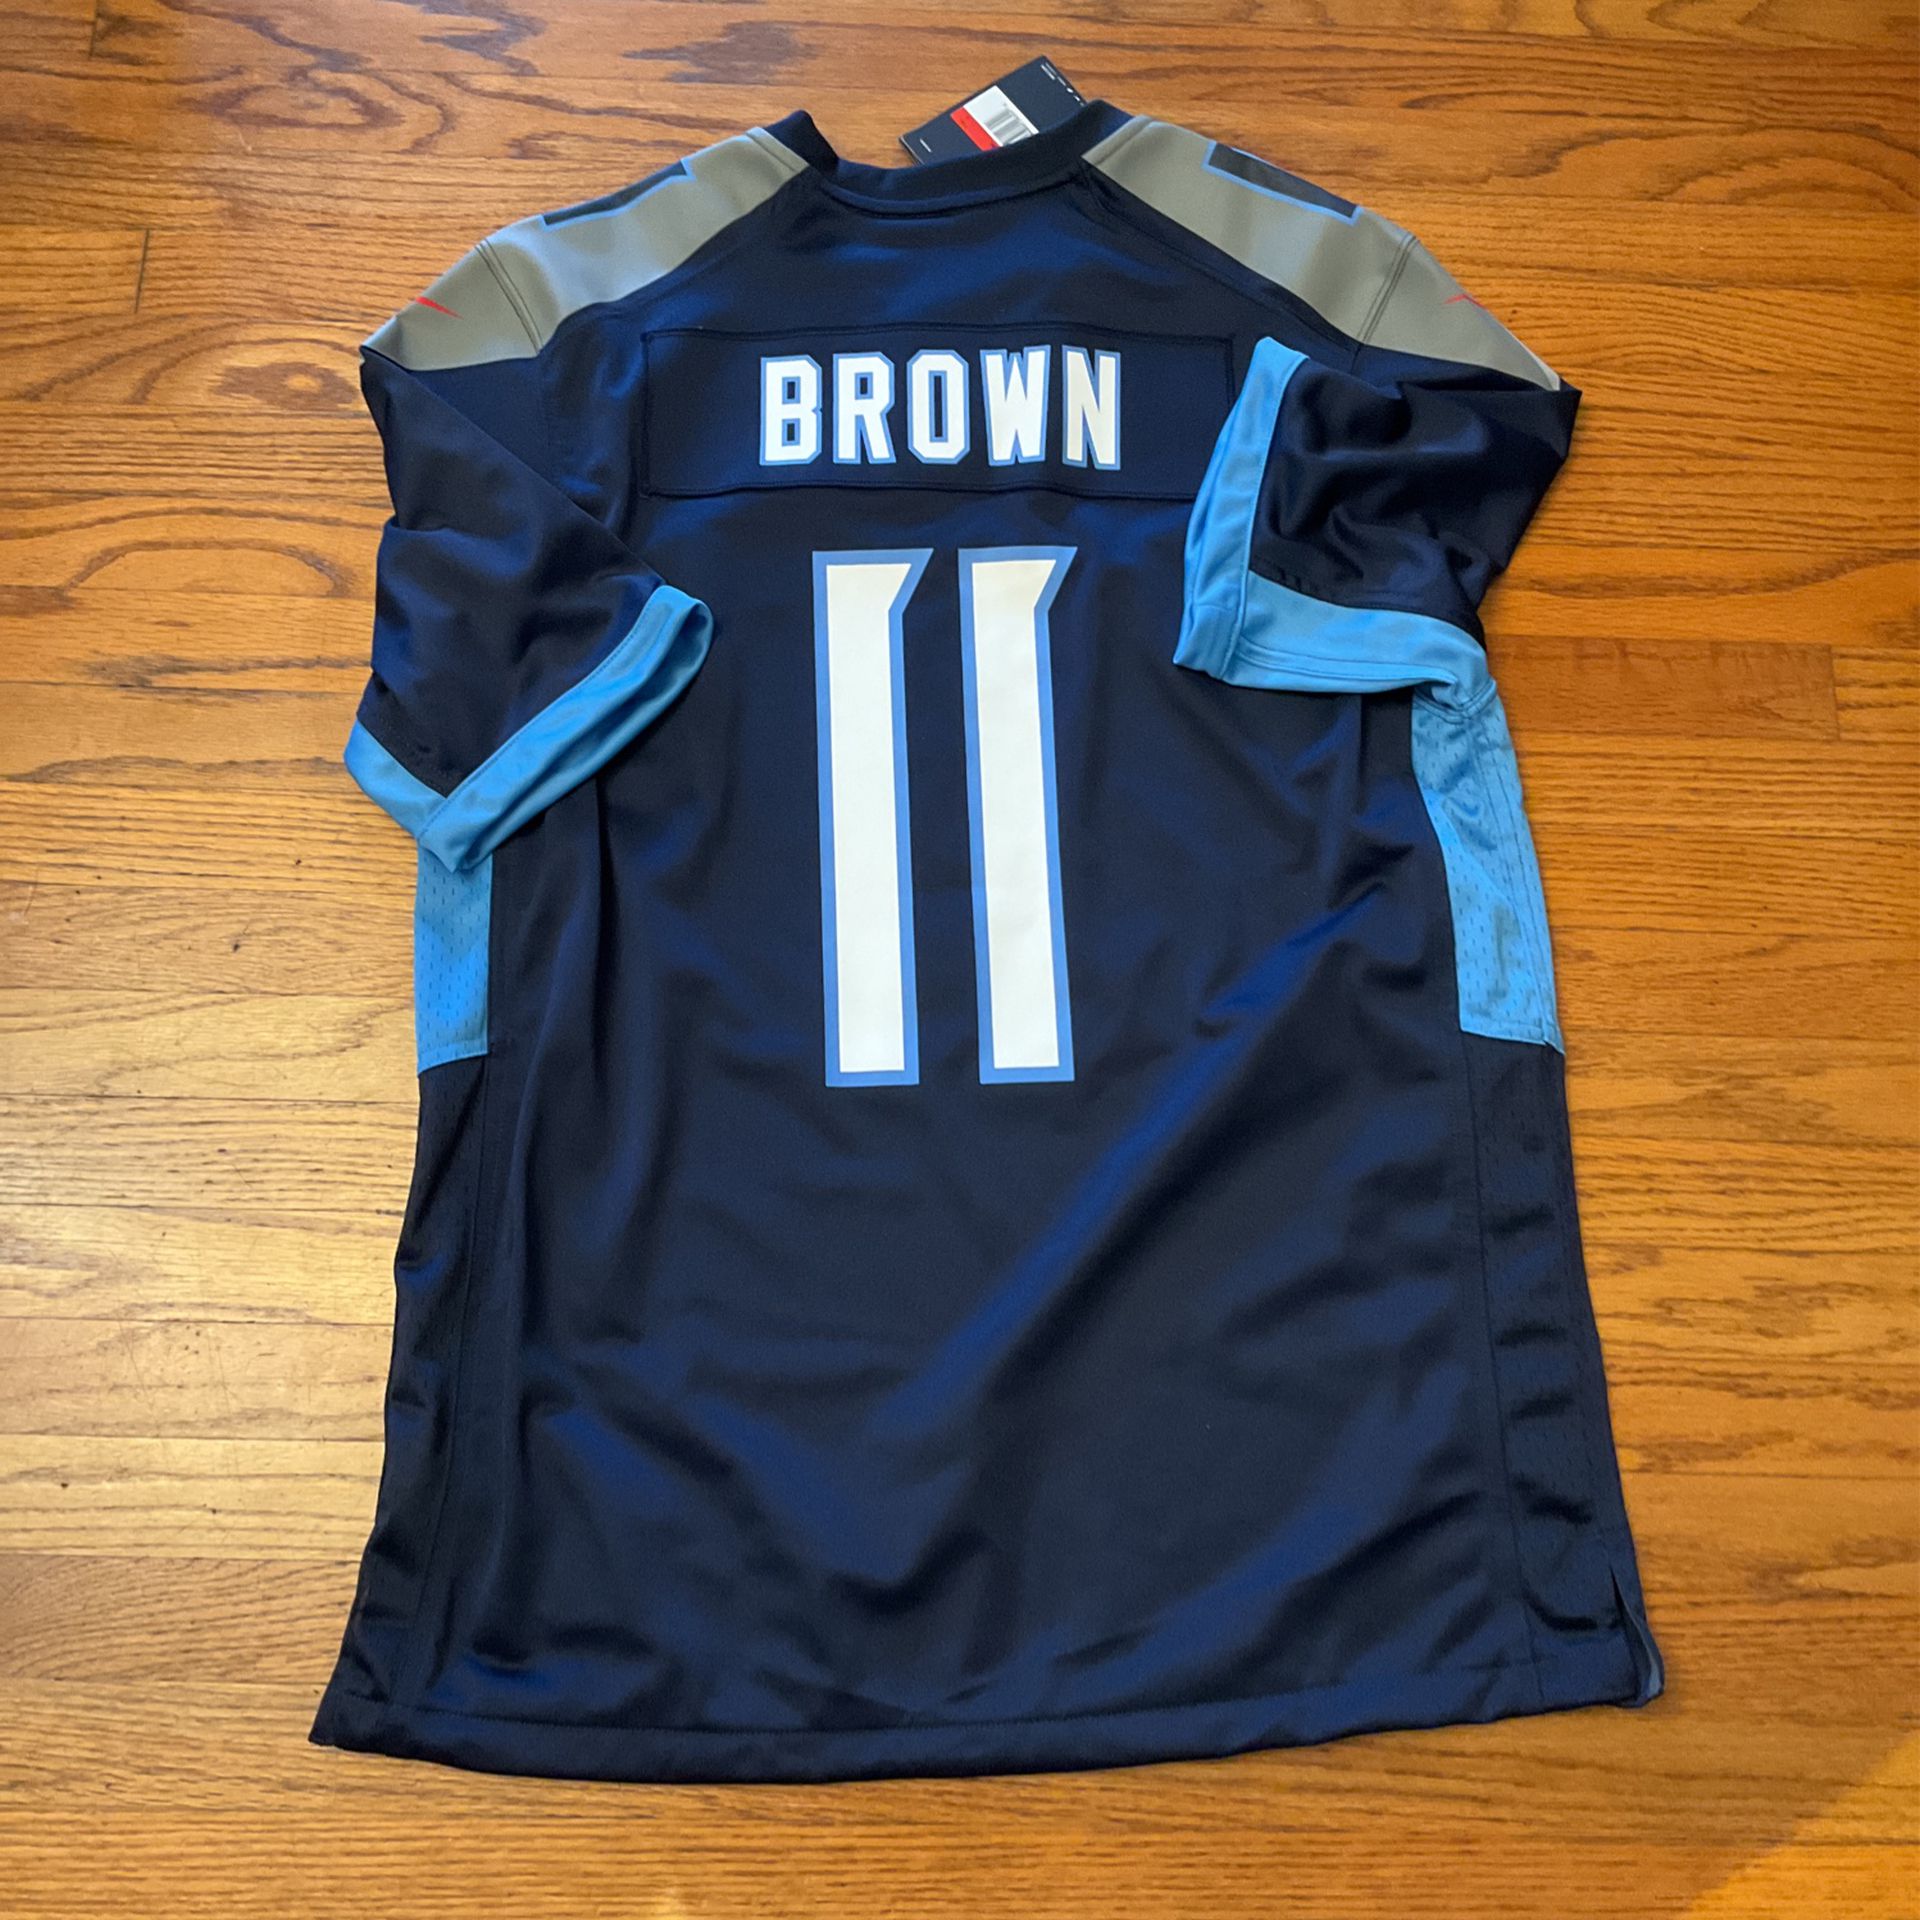 Nike Mens Blue Tennessee Titans #11 NFL A.J. Brown Football Jersey Size  Large for Sale in Norwalk, CA - OfferUp